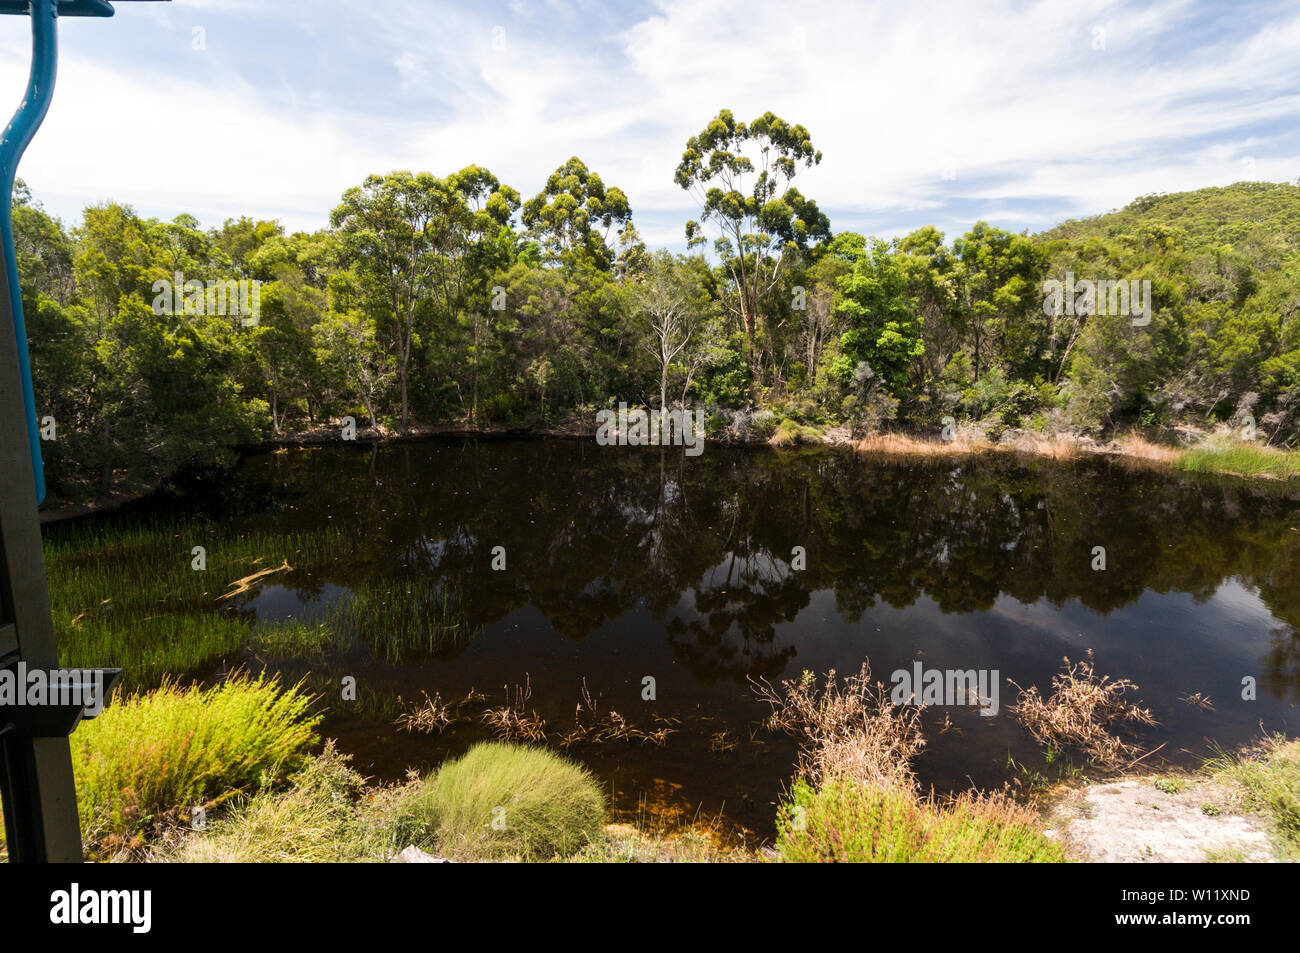 A large blackened billabong surrounded by rainforests in the grounds of the Kingfisher Bay resort on Fraser Island, Australia  Fraser Island is a Worl Stock Photo